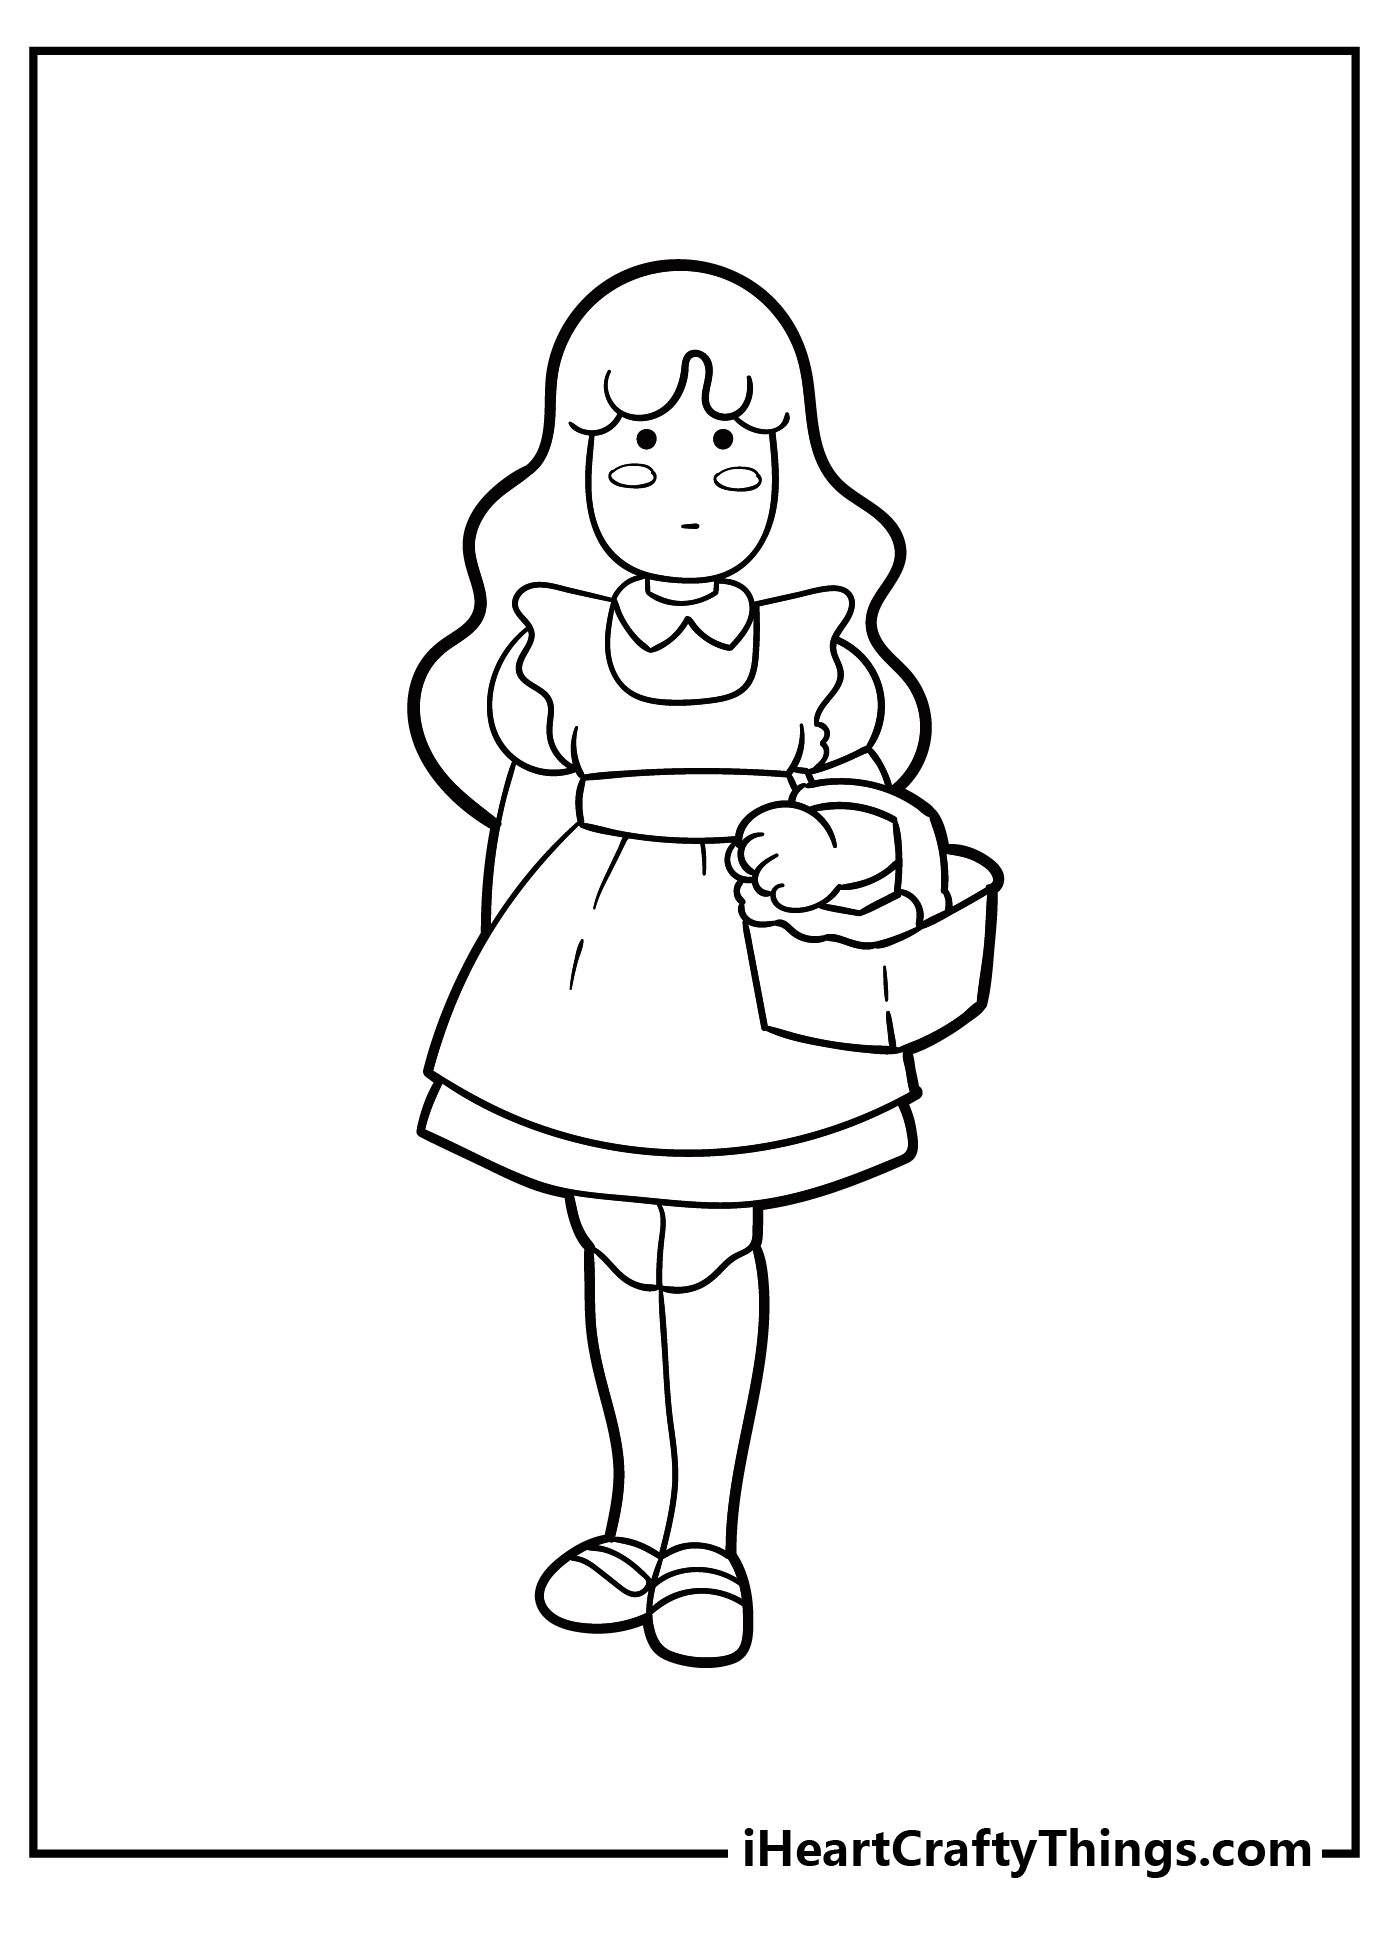 Wizard Of Oz Coloring Pages for preschoolers free printable